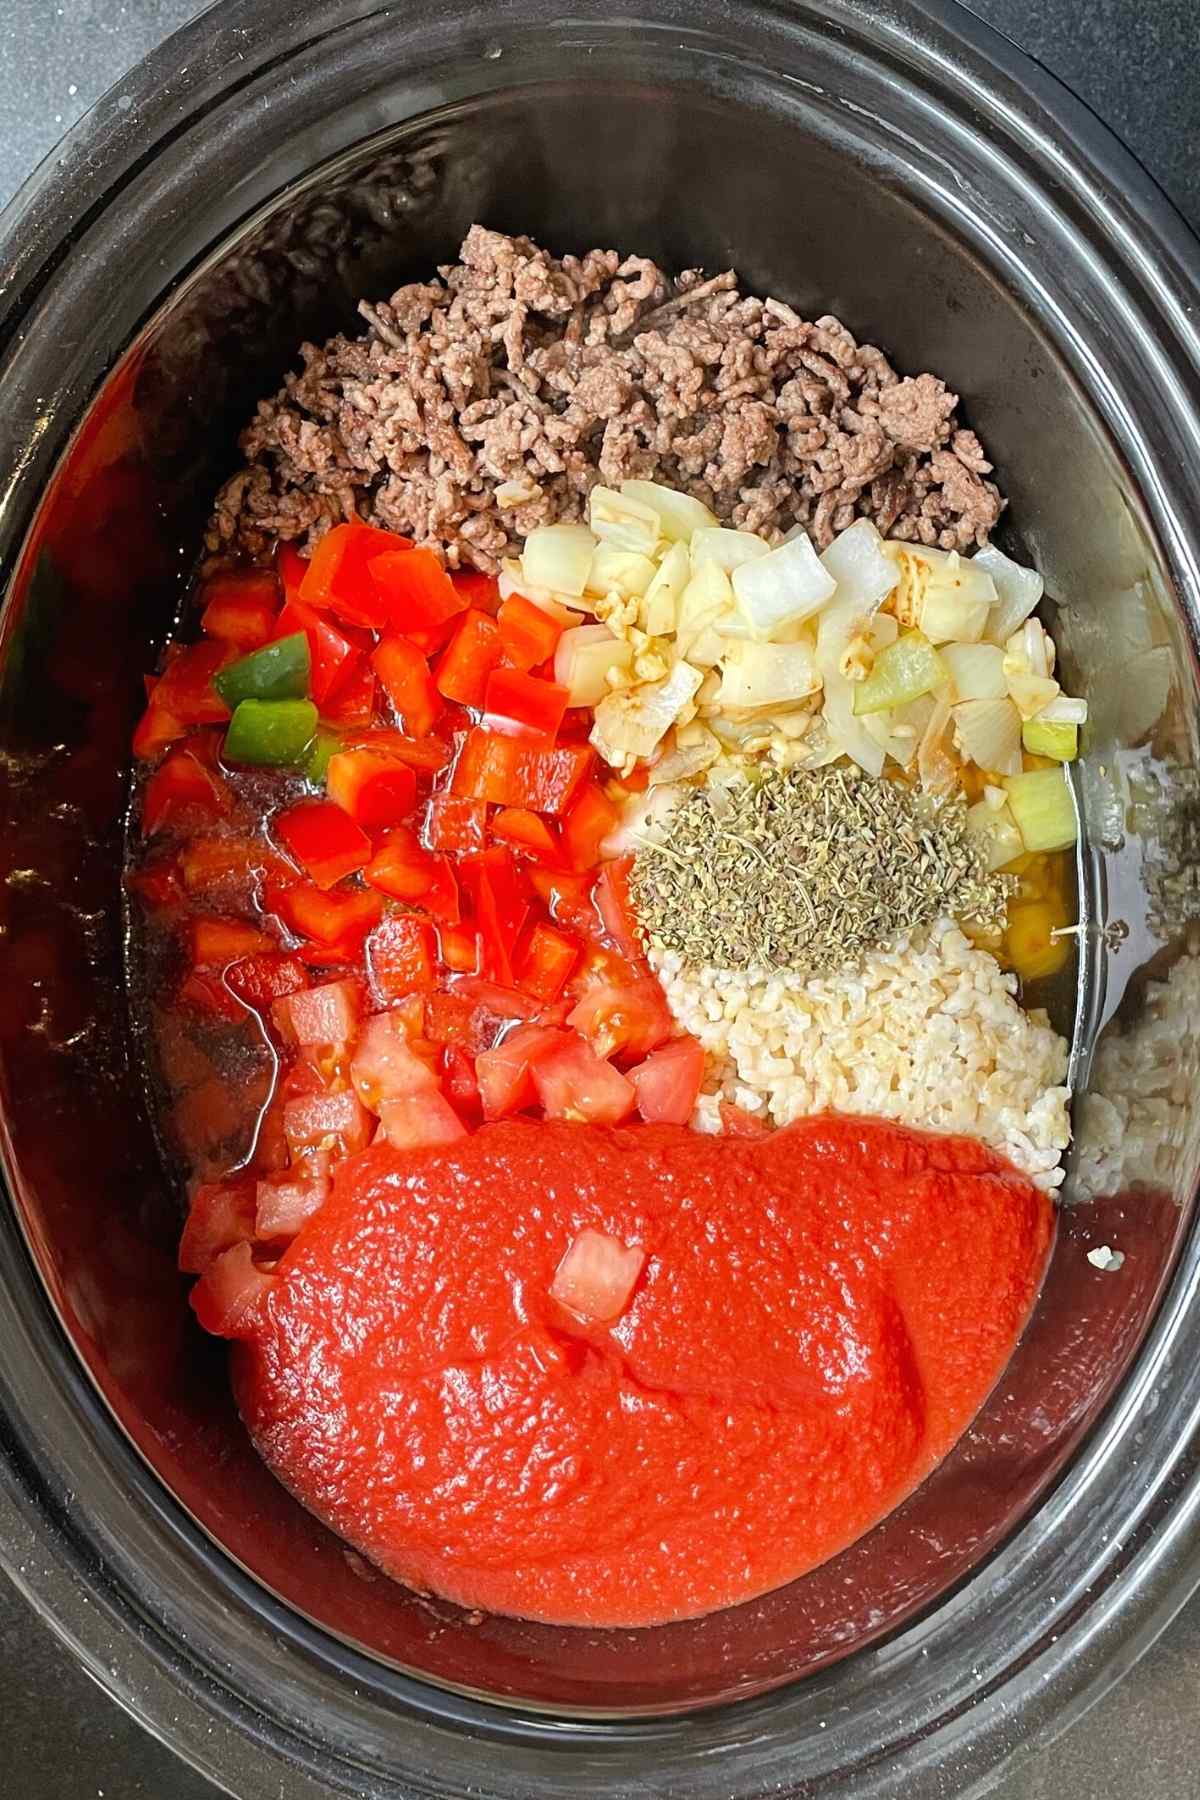 Soup ingredients in the slow cooker before cooking